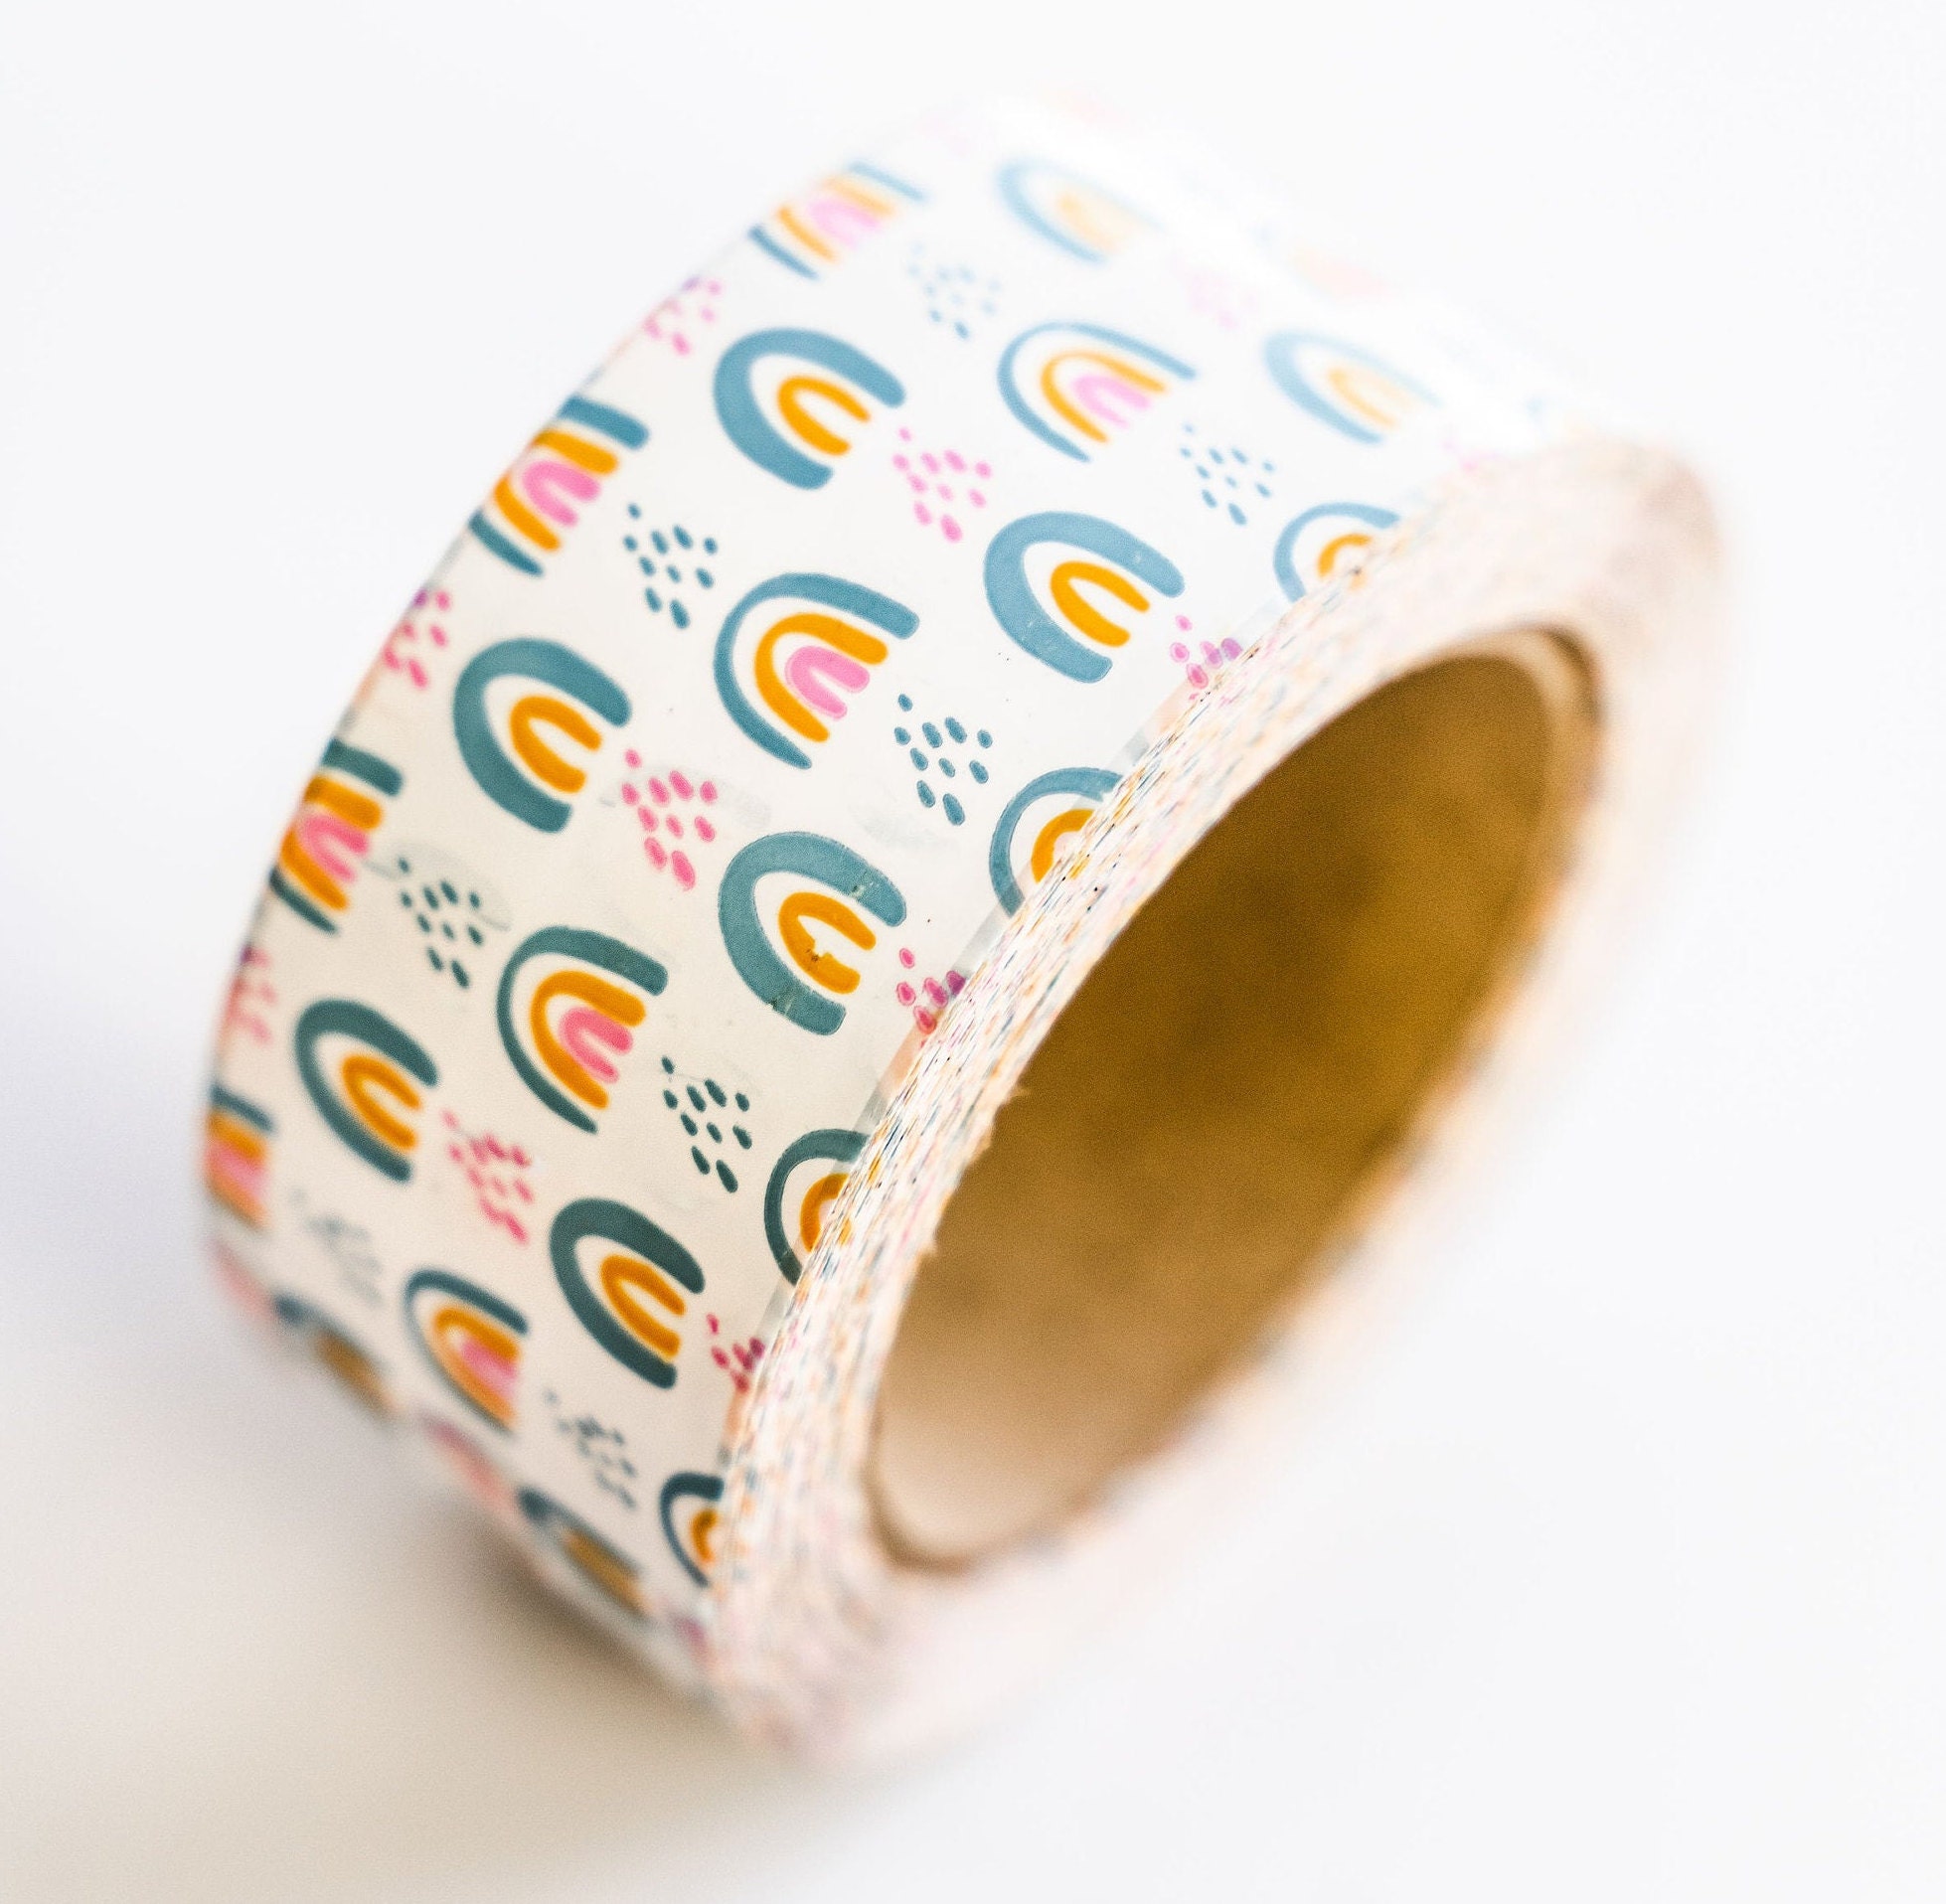 2 Inch Celestial Magic Tape 110 Yards, 330 Ft. Cute Shipping Tape